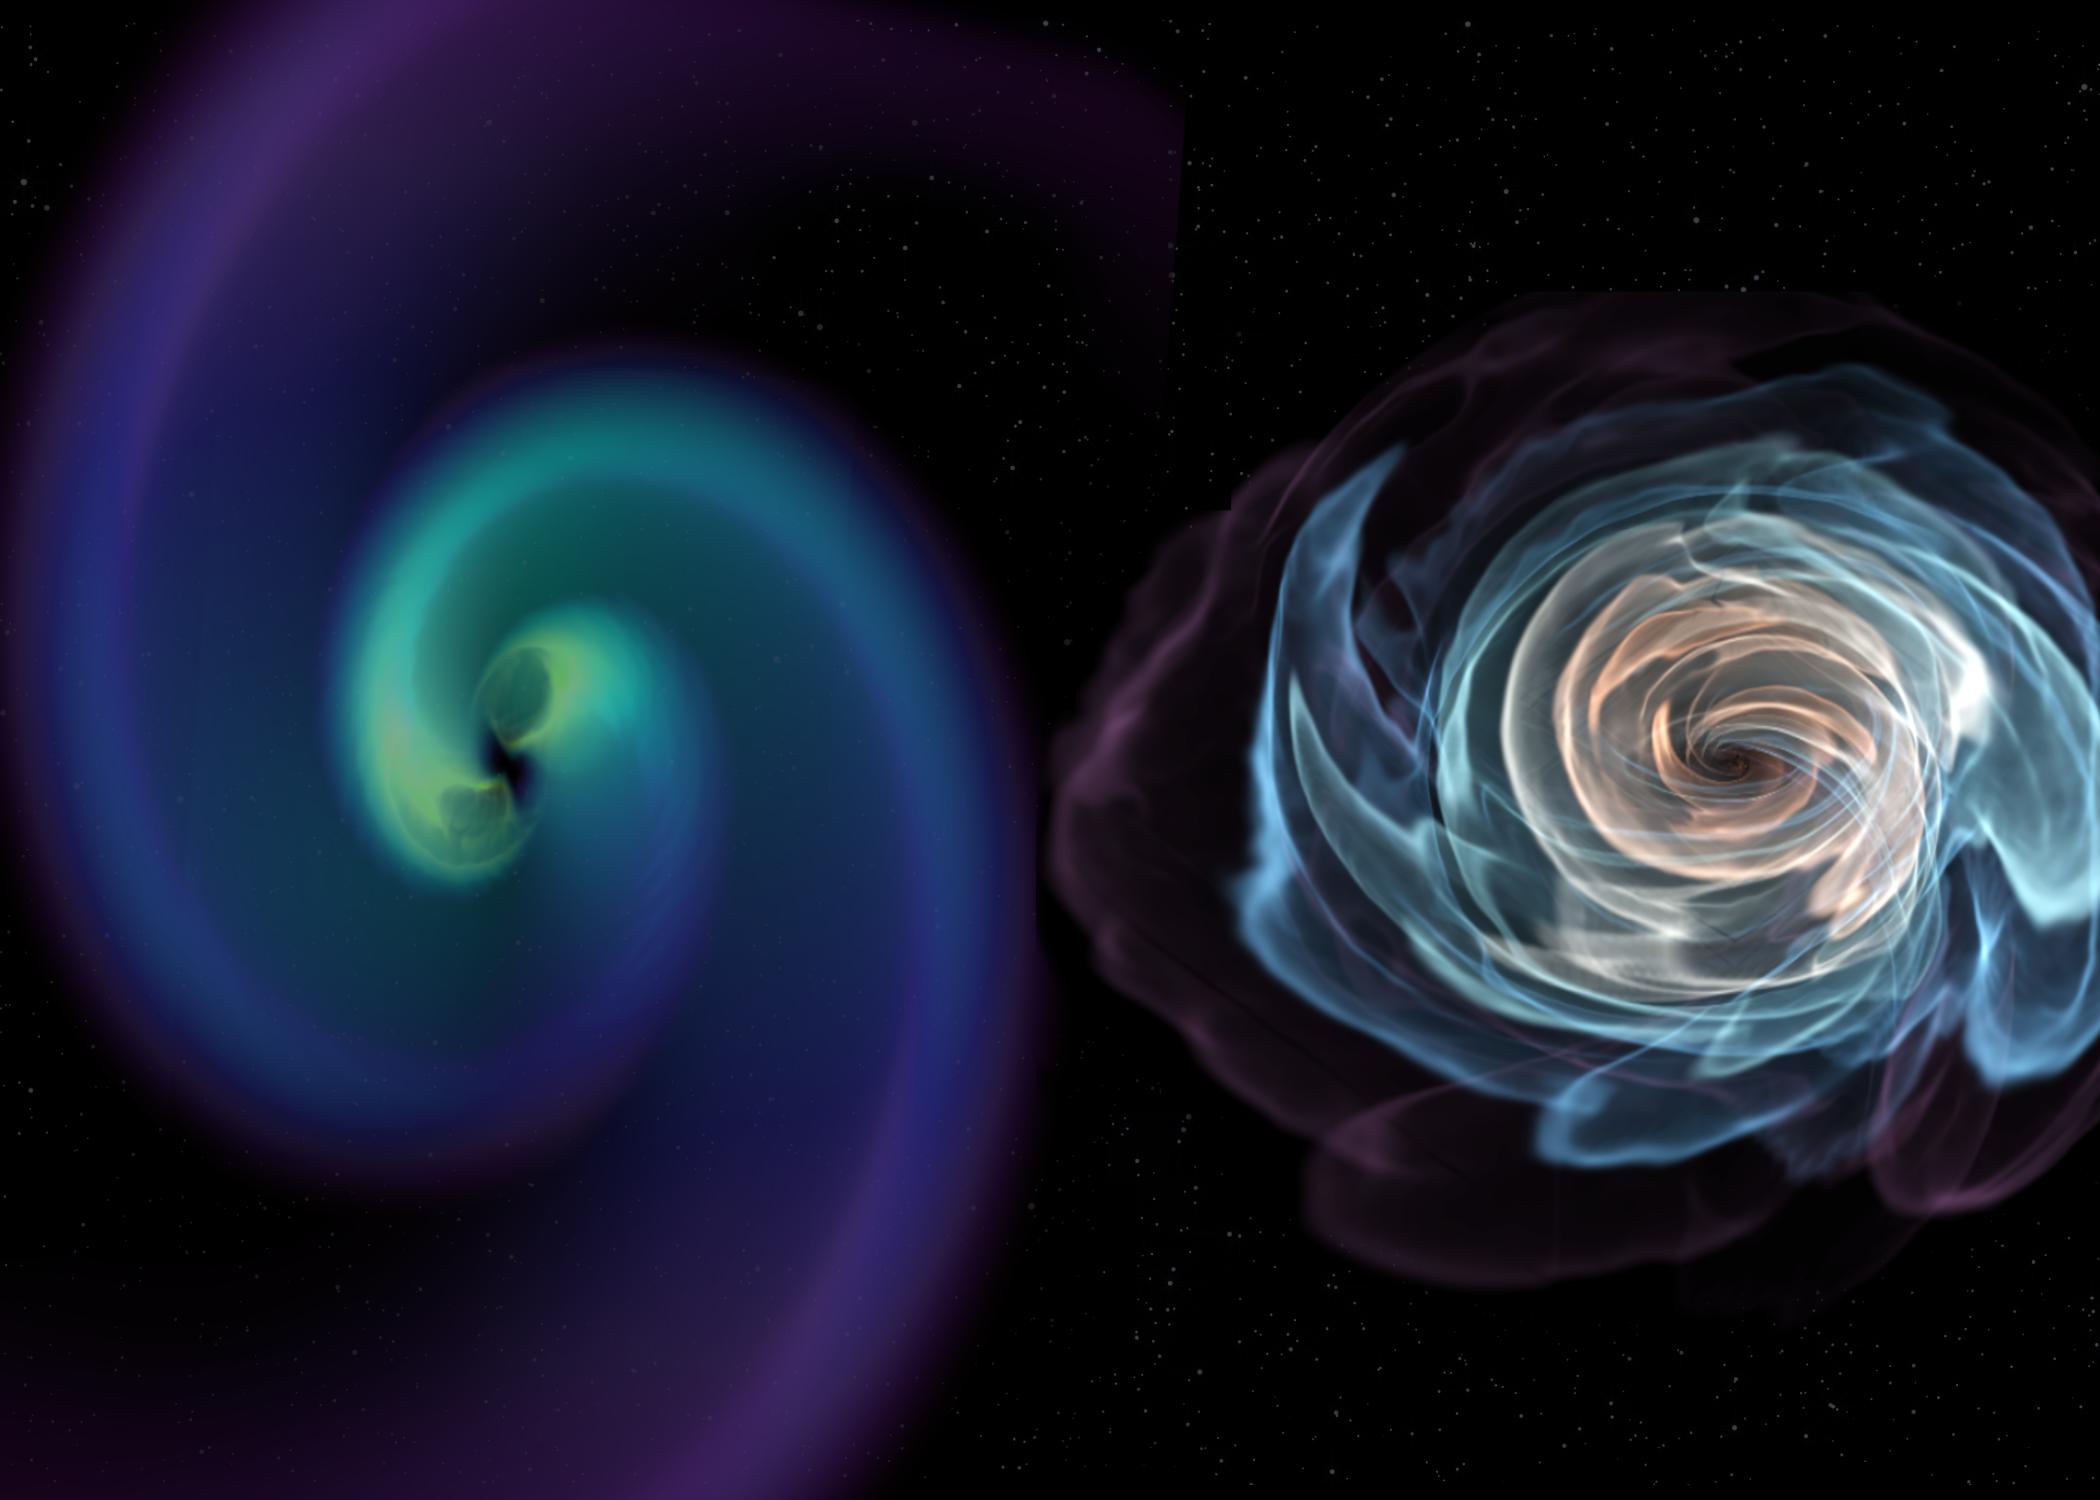 Figure 1 Simulation of the merger of two neutron stars detected by LIGO using the Einstein Toolkit. Left are the gravitational waves emitted and right the disrupted material. Credit: Karan Jani, Georgia Tech